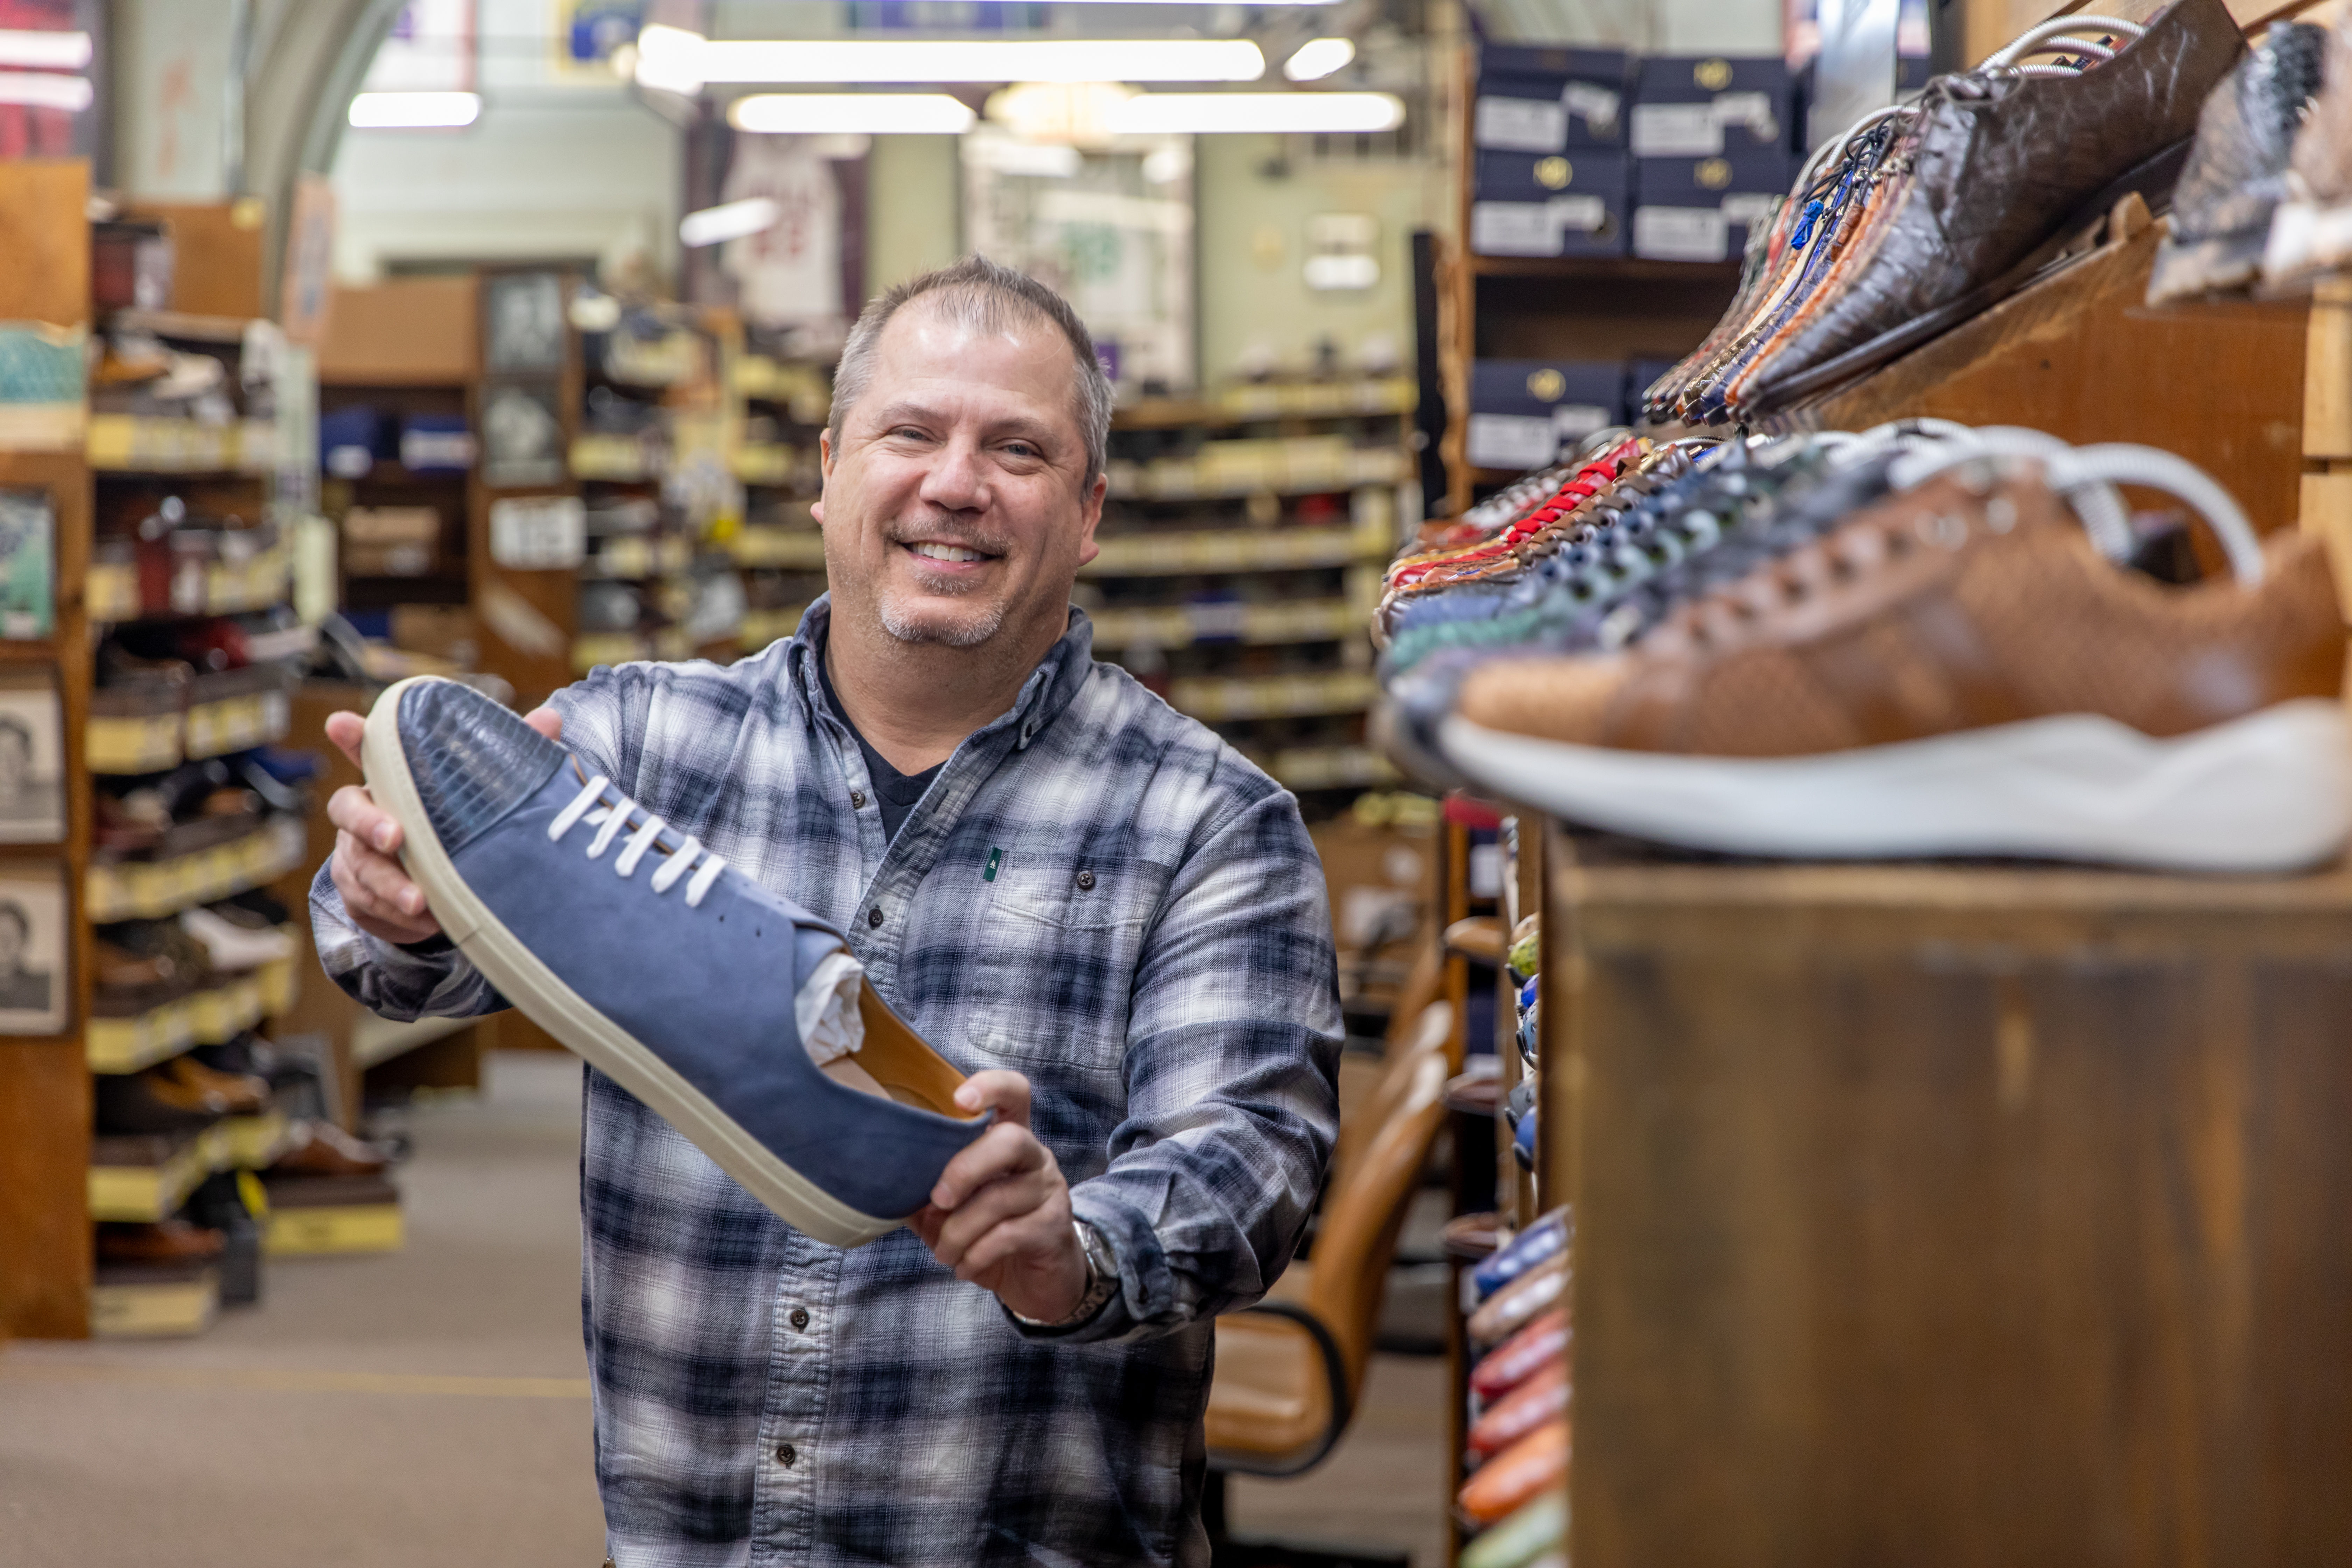 Spotlight on Small Businesses: Friedman’s Shoes